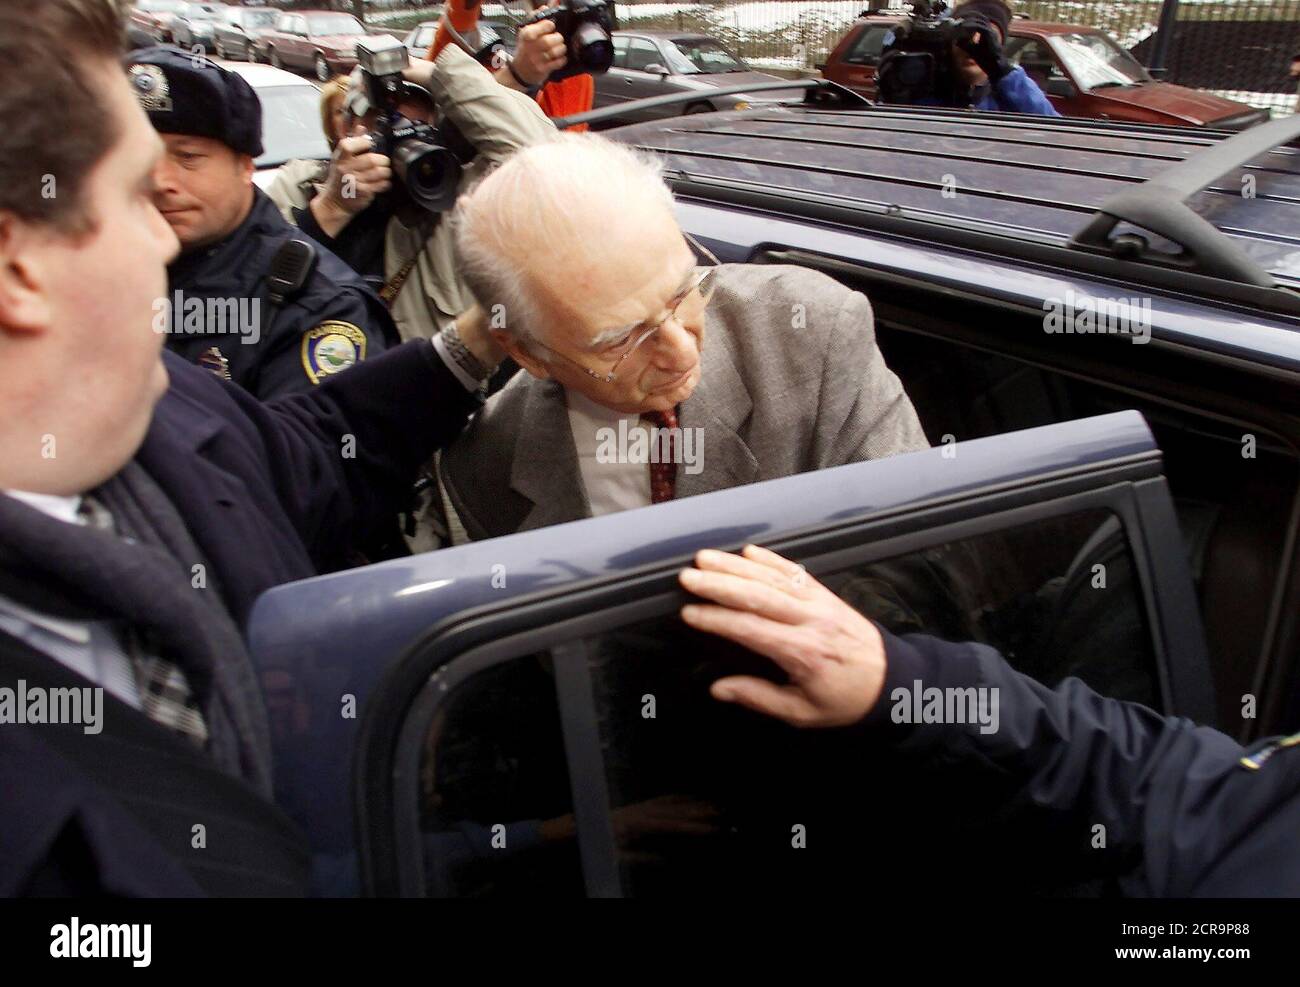 Roman Catholic Reverand Paul Shanley, awaiting trial on charges he abused young boys while a priest in the Boston Archdiocese, ducks into an SUV as he leaves the Middlesex Superior Courthouse freed on bail December 11, 2002 in Cambridge, Massachusetts. Shanley was freed after posting $300,000 cash bail raised by friends, relatives and supporters to be freed while awaiting trial. REUTERS/Jim Bourg REUTERS  JRB Stock Photo